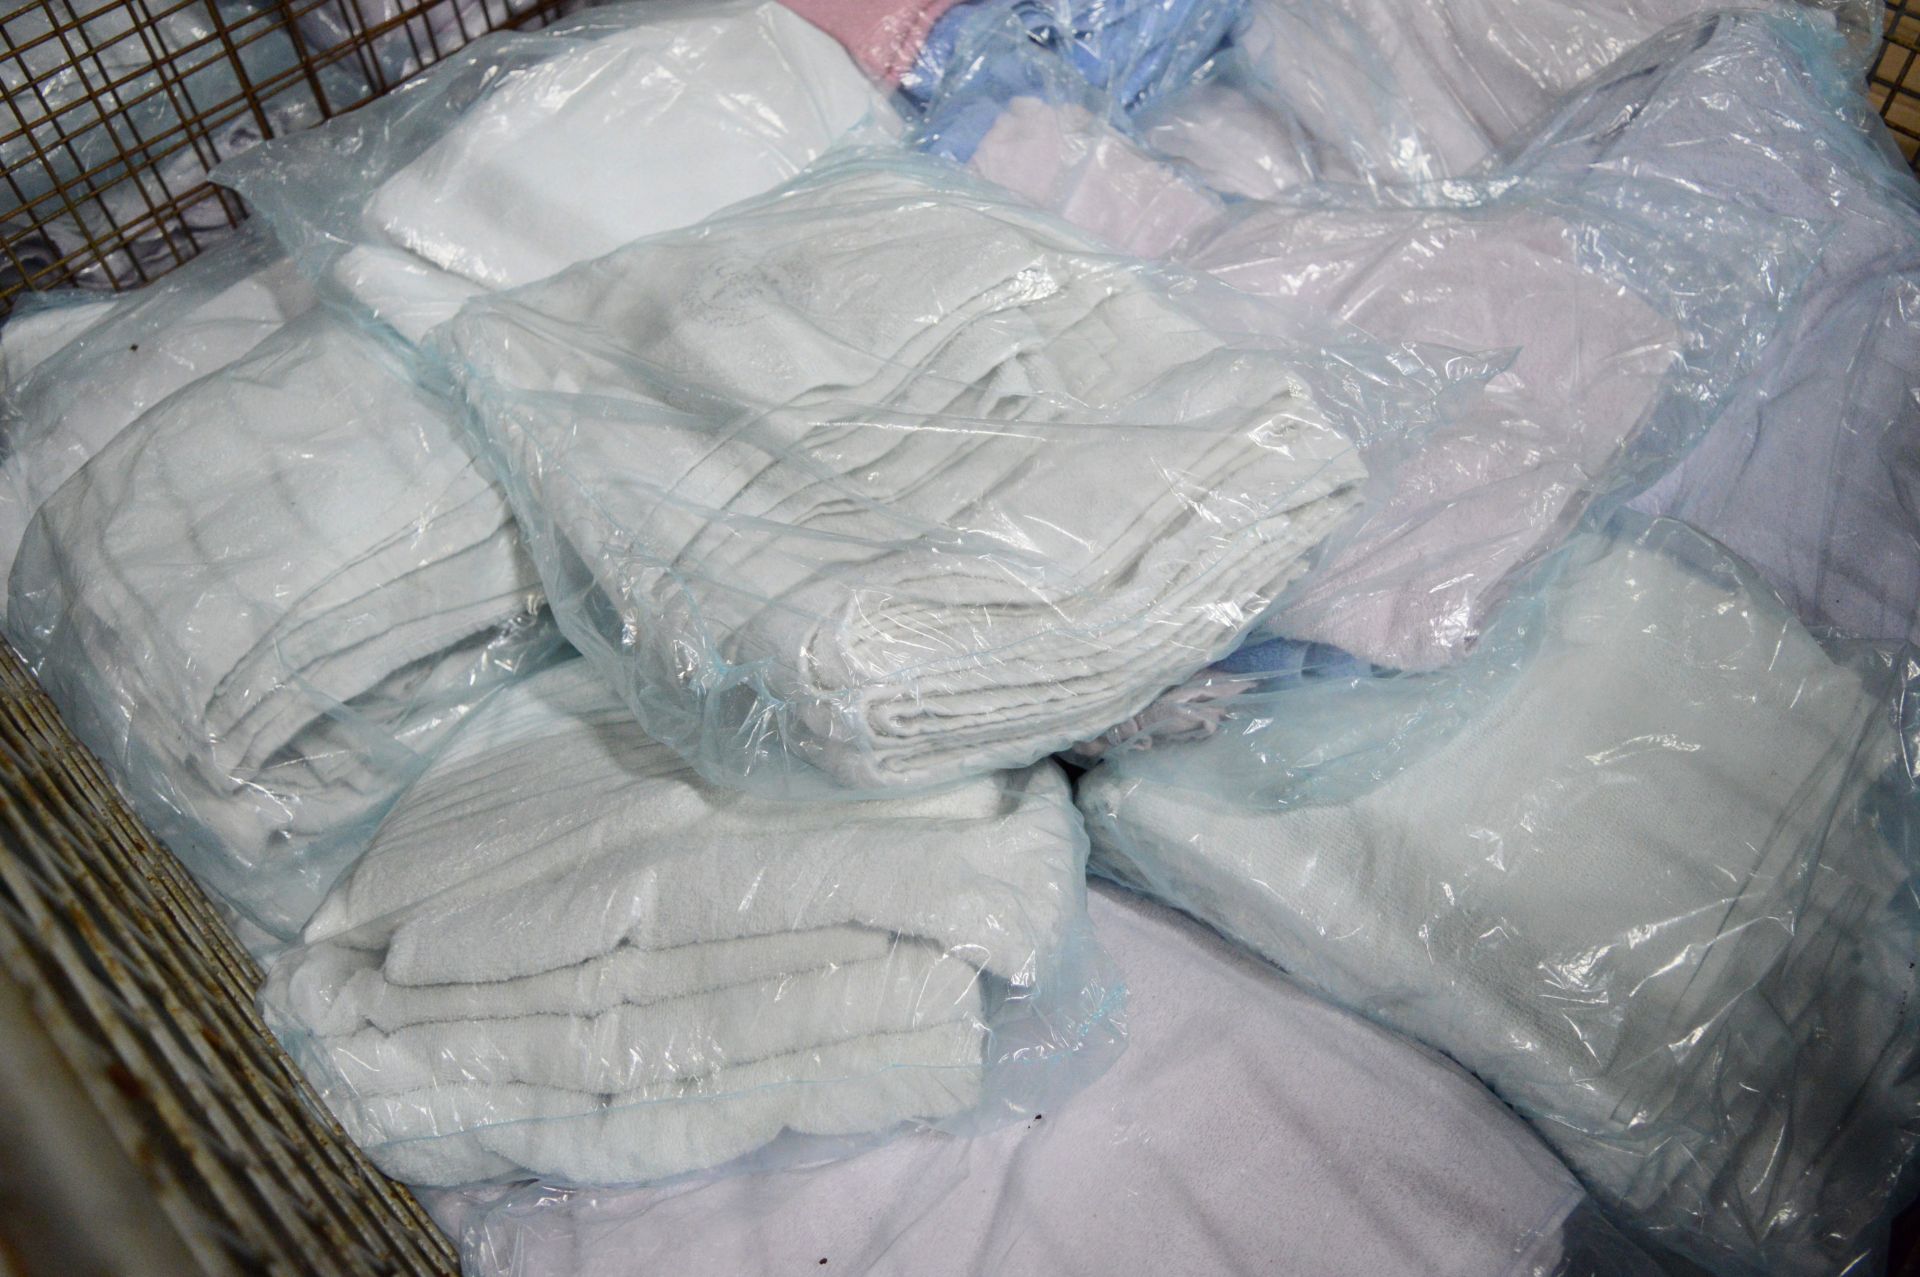 29x Packs of Towels. - Image 2 of 2